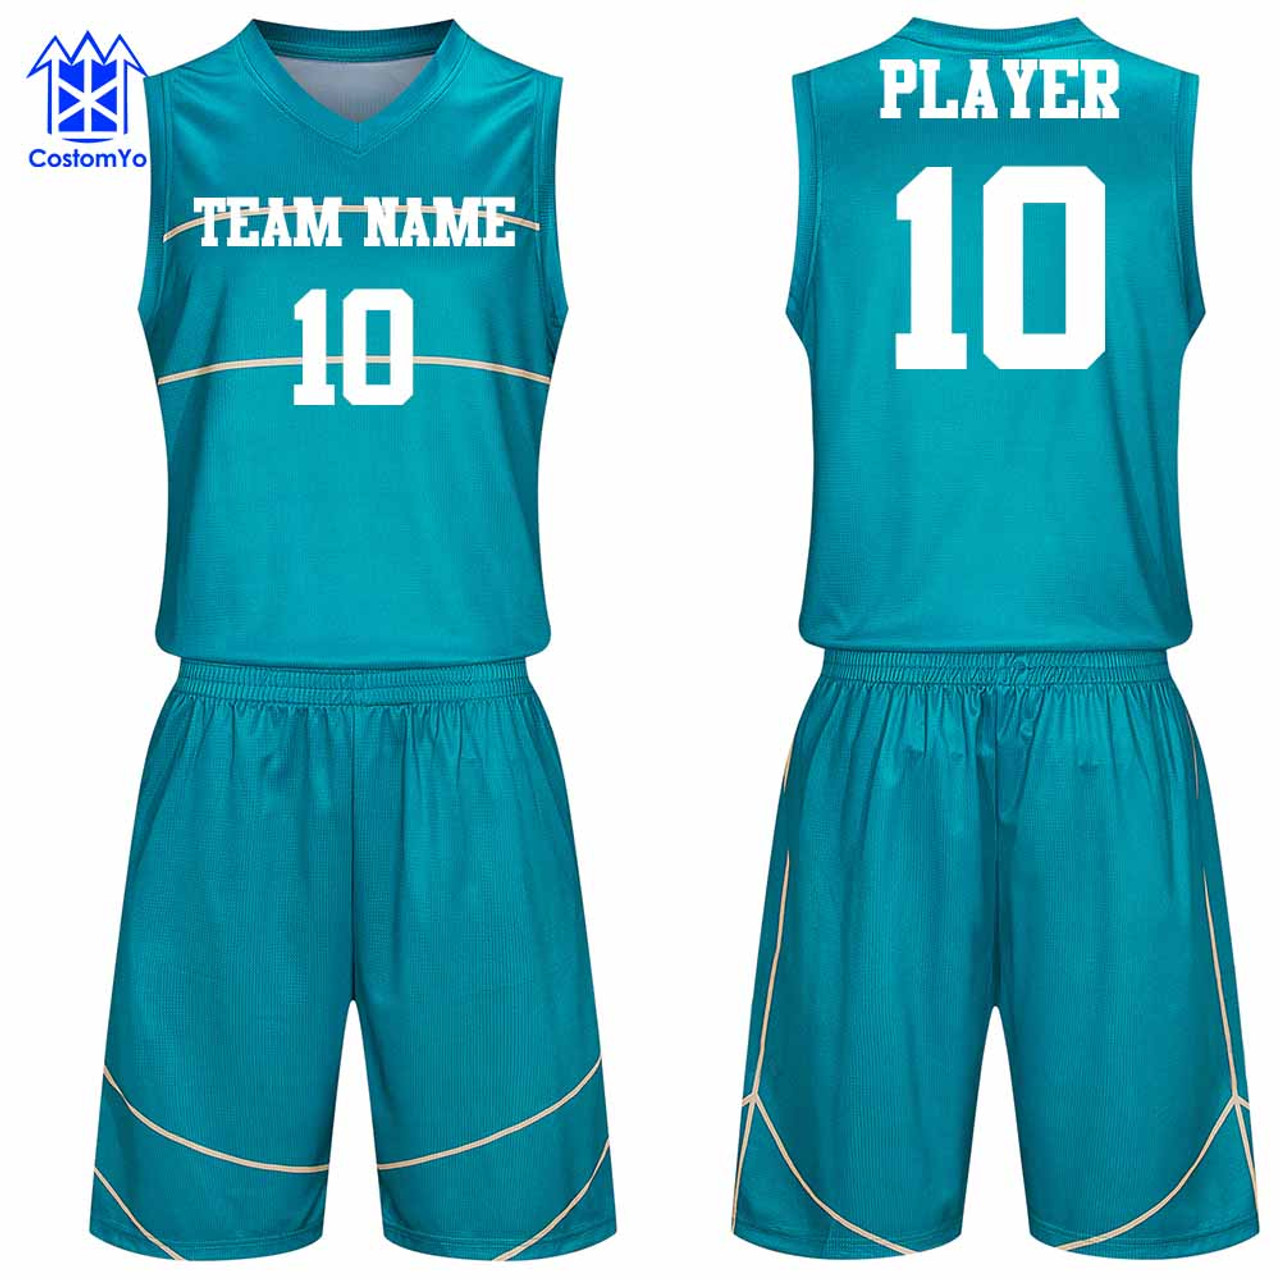 HKsportswear Custom Basketball Jerseys - Retro 3 Color Old School Design- Order Custom Shorts for A Complete Uniform - Team Name, Player Name and Number